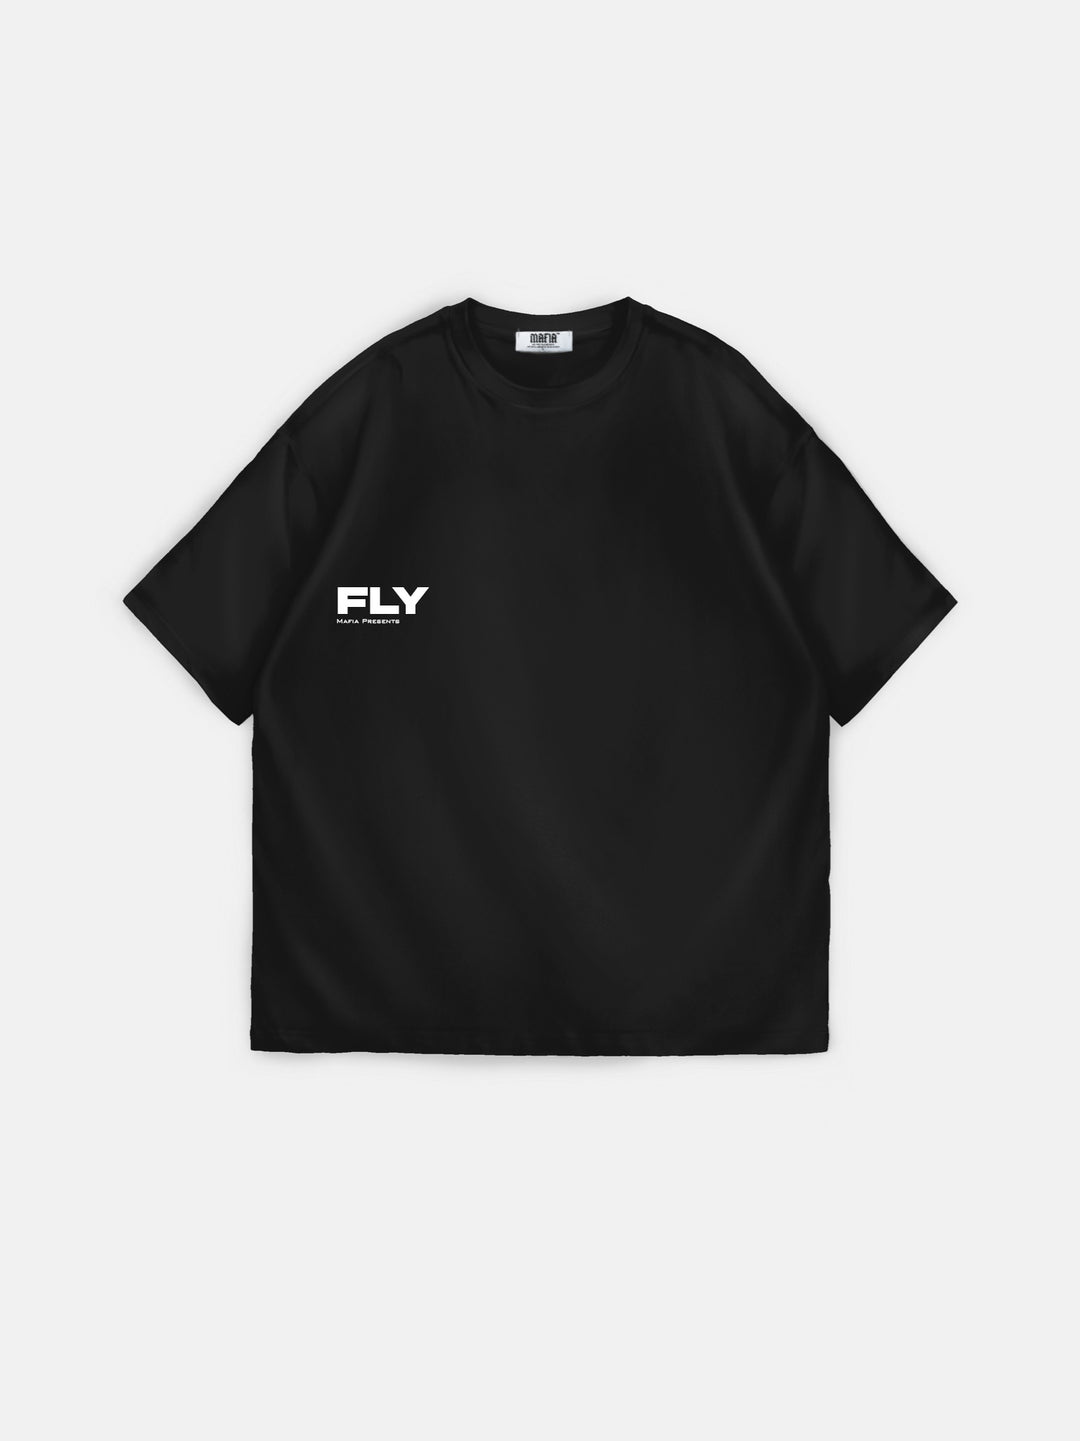 Oversize 'Fly' T-shirt - Black and Stone